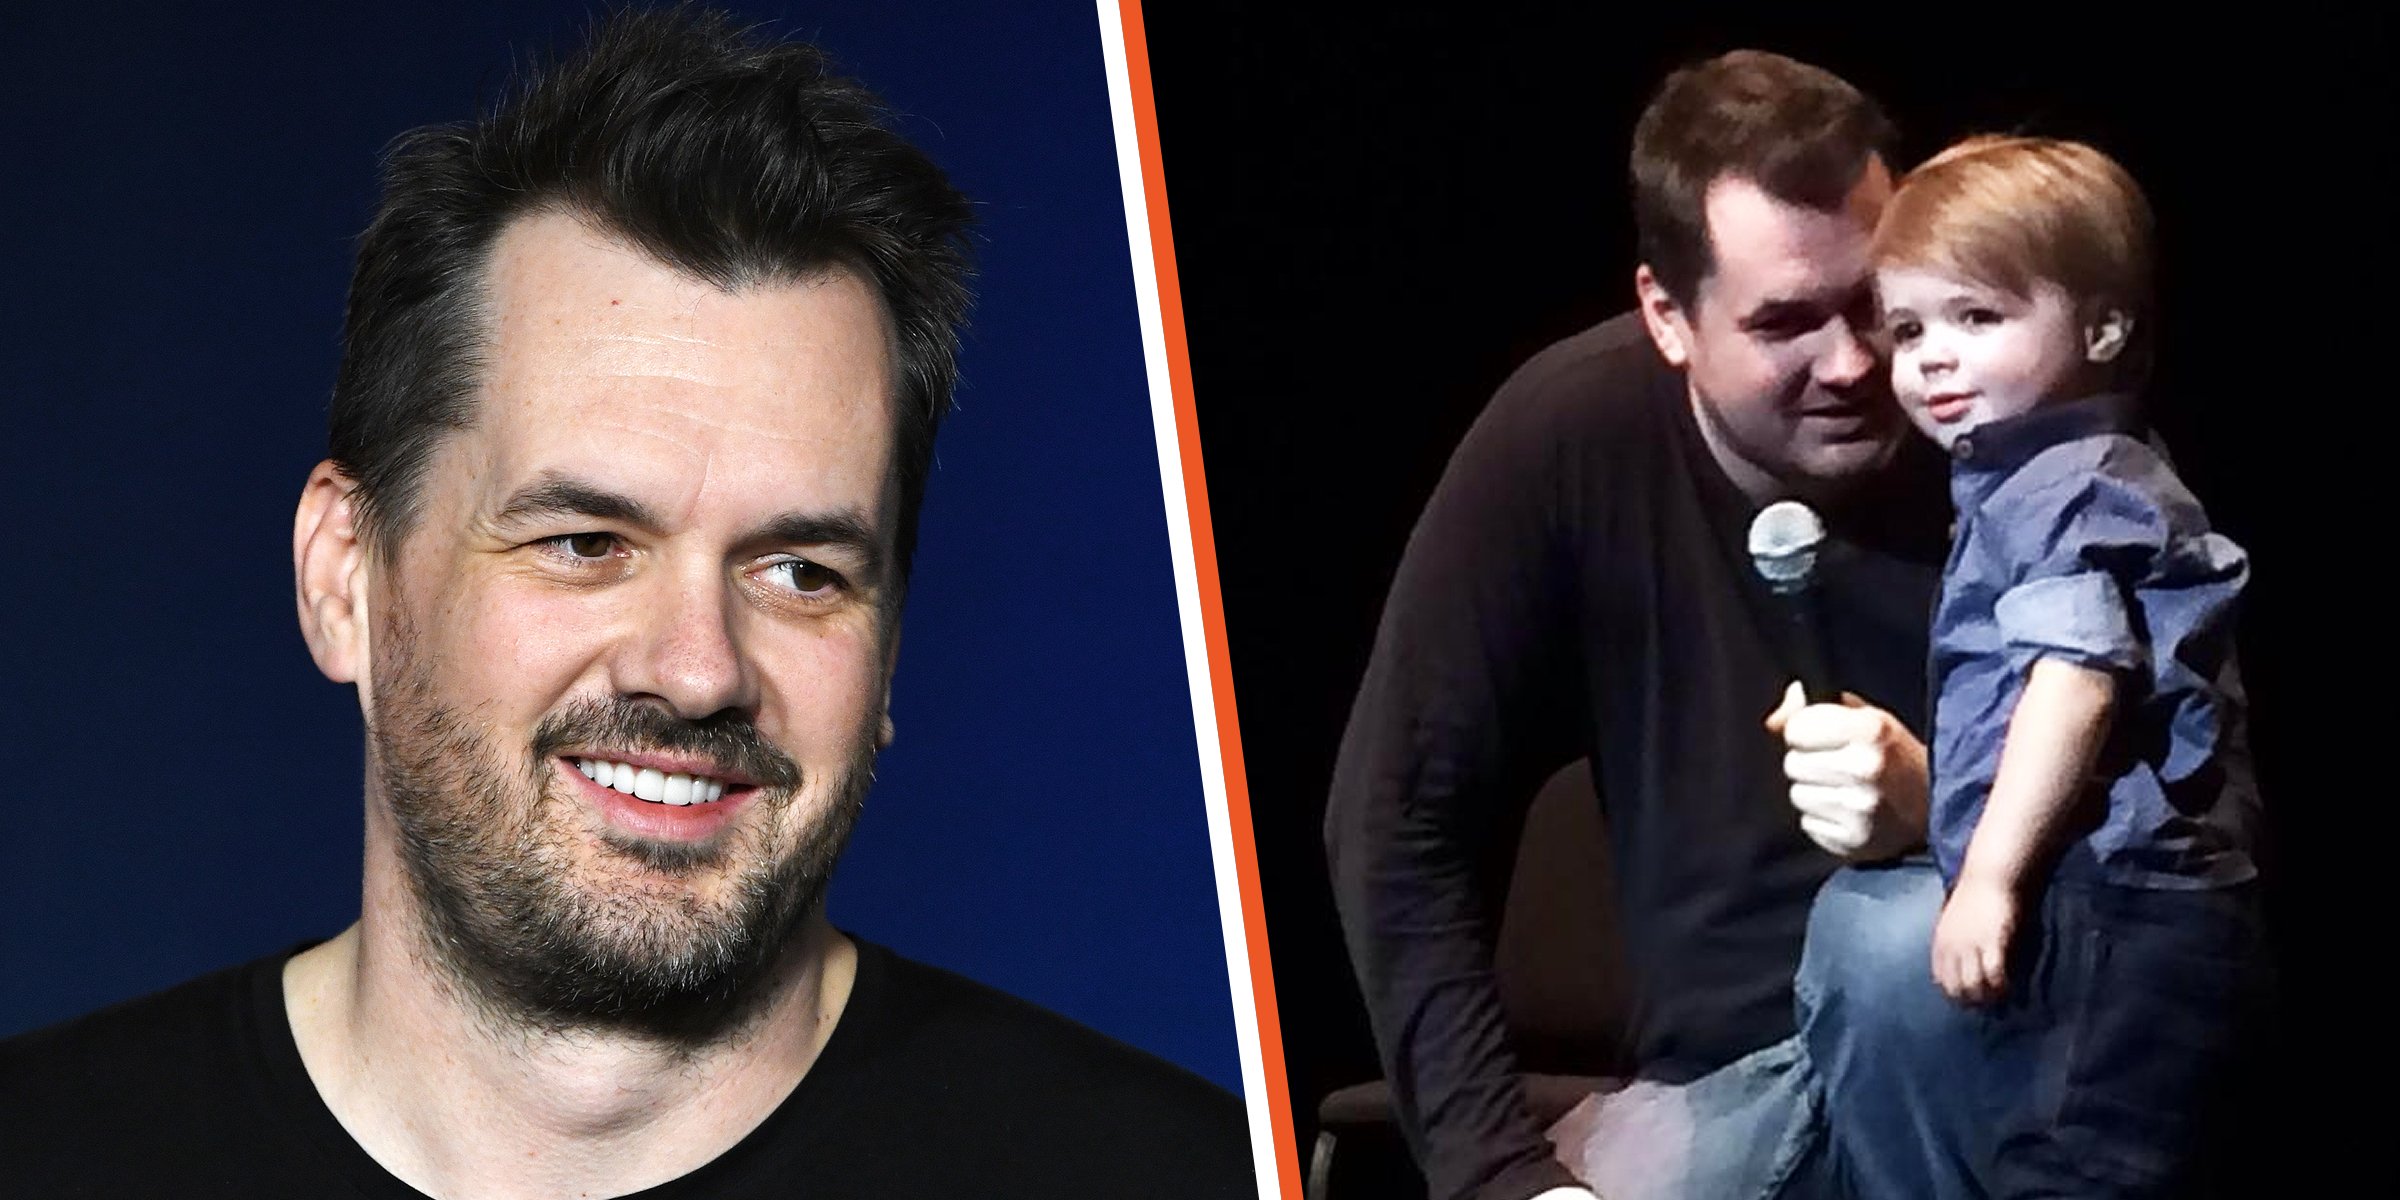 Jim Jefferies | Jim Jefferies and Young Hank Jefferies Are Pictured on Stage | Source: Getty Images | Facebook/JimJefferies